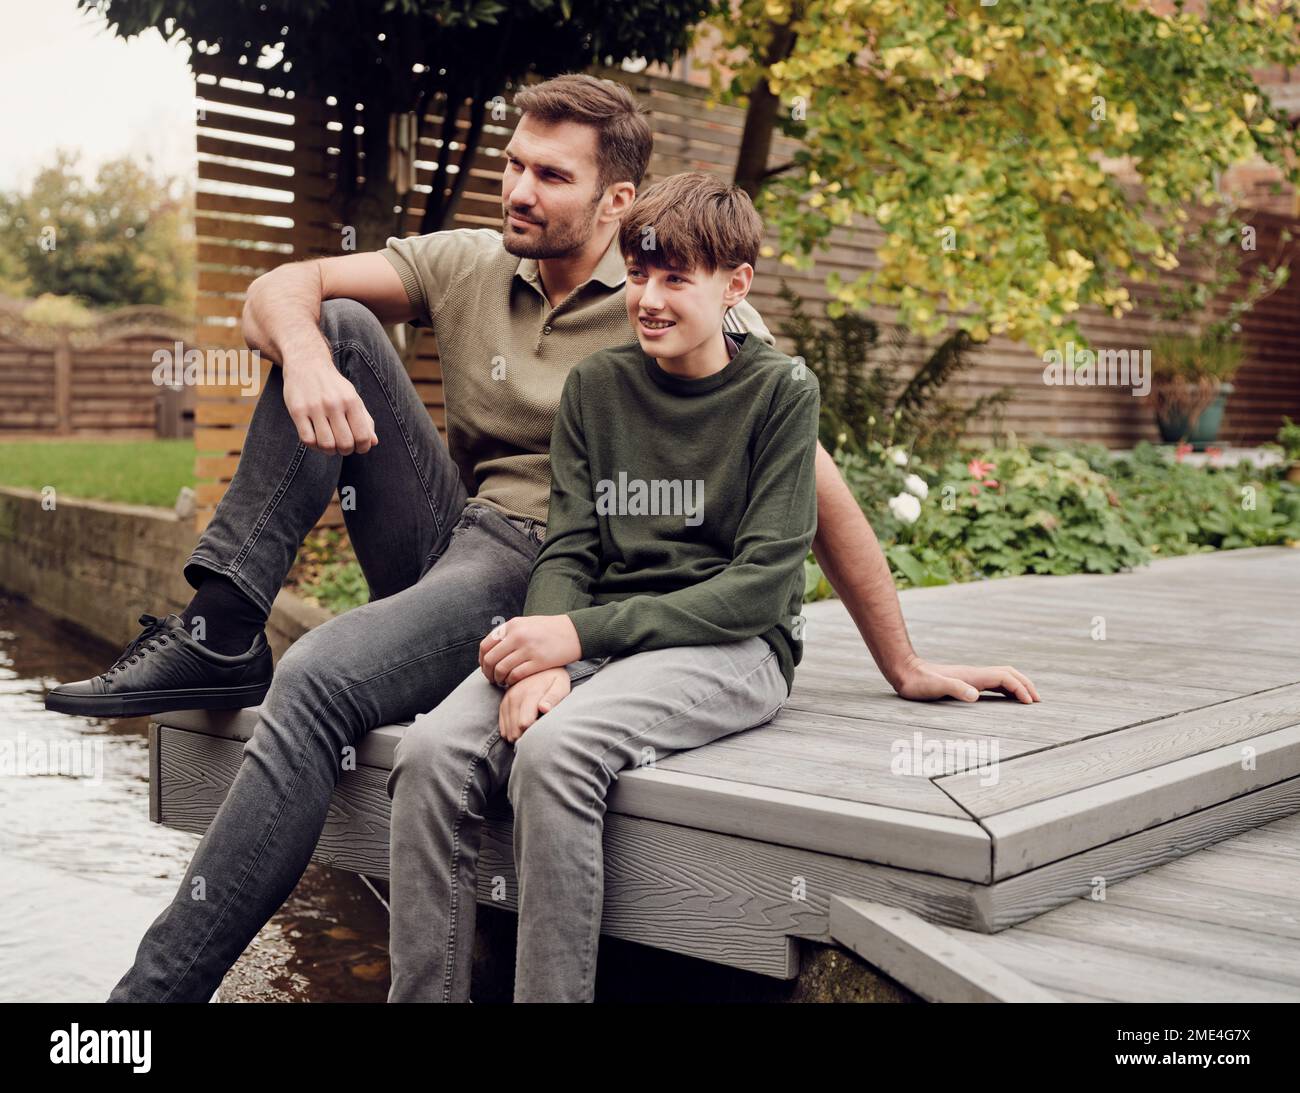 Fathe and son spending time in garden together Stock Photo